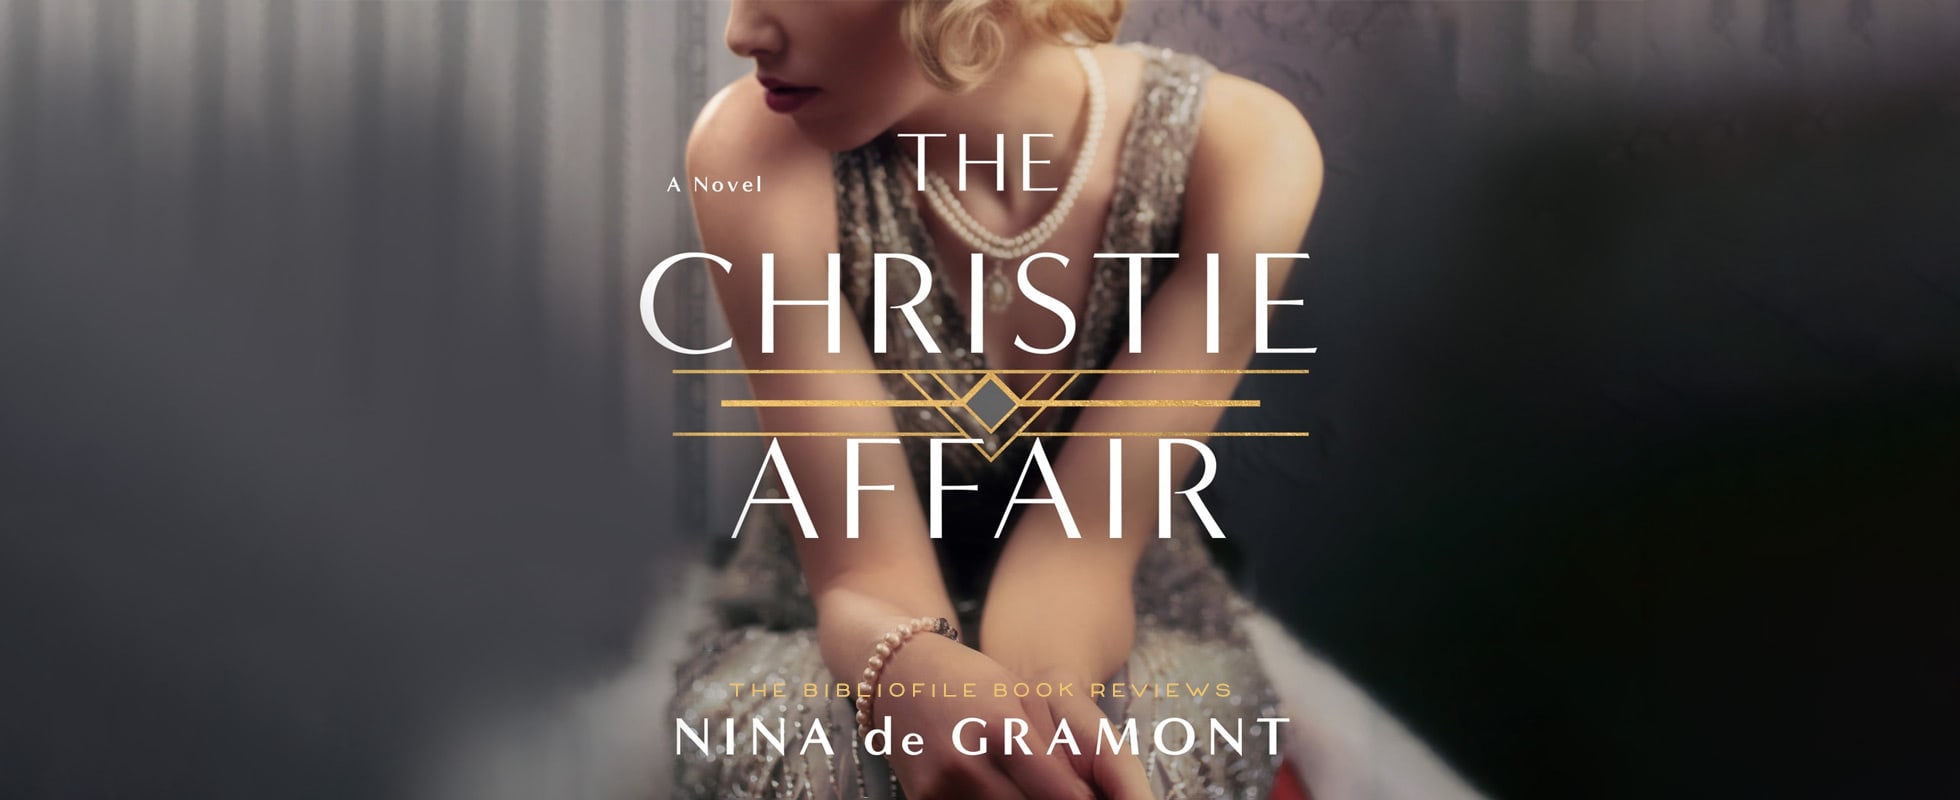 the christie affair by nina de gramont book review plot summary synopsis spoilers discussion